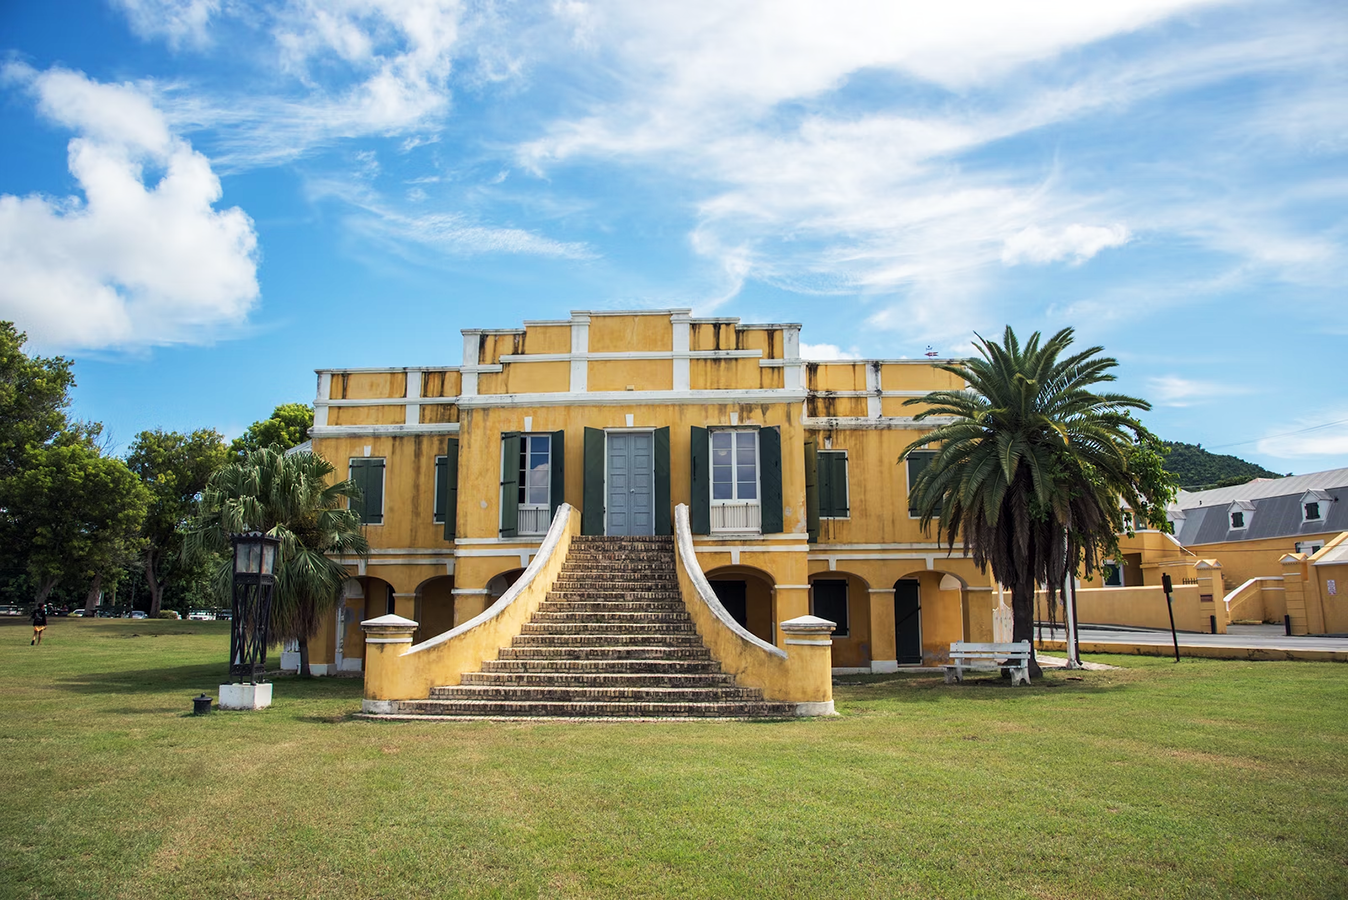 Christiansted National Historic Site © NPF